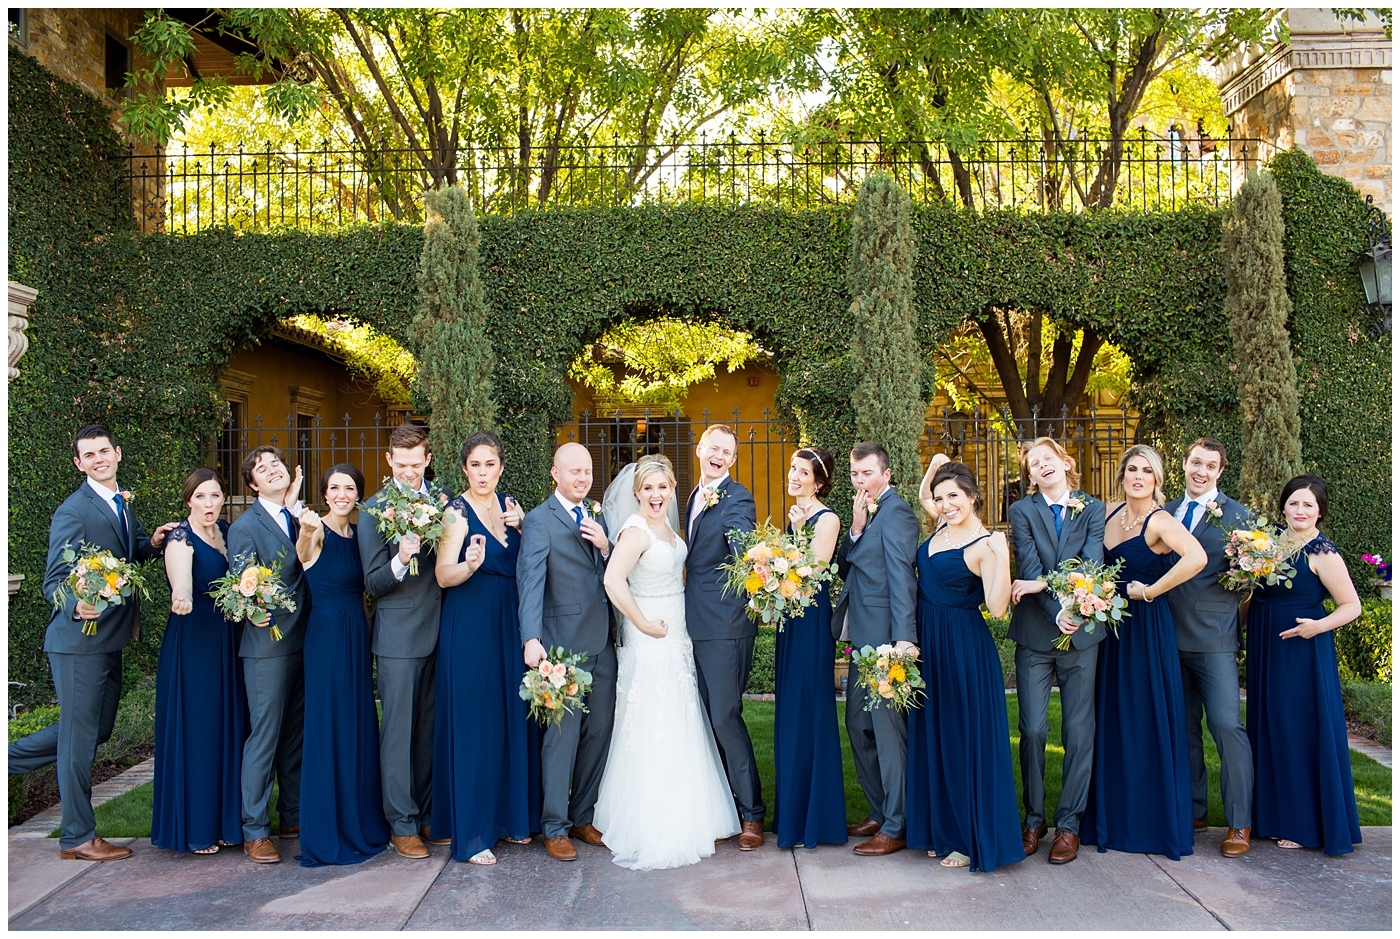 bride in essence designs wedding dress with cap sleeves portrait group shot with bridesmaids in navy blue long dresses with groom in gray suit with pink tie and groomsmen in gray suits with blue ties